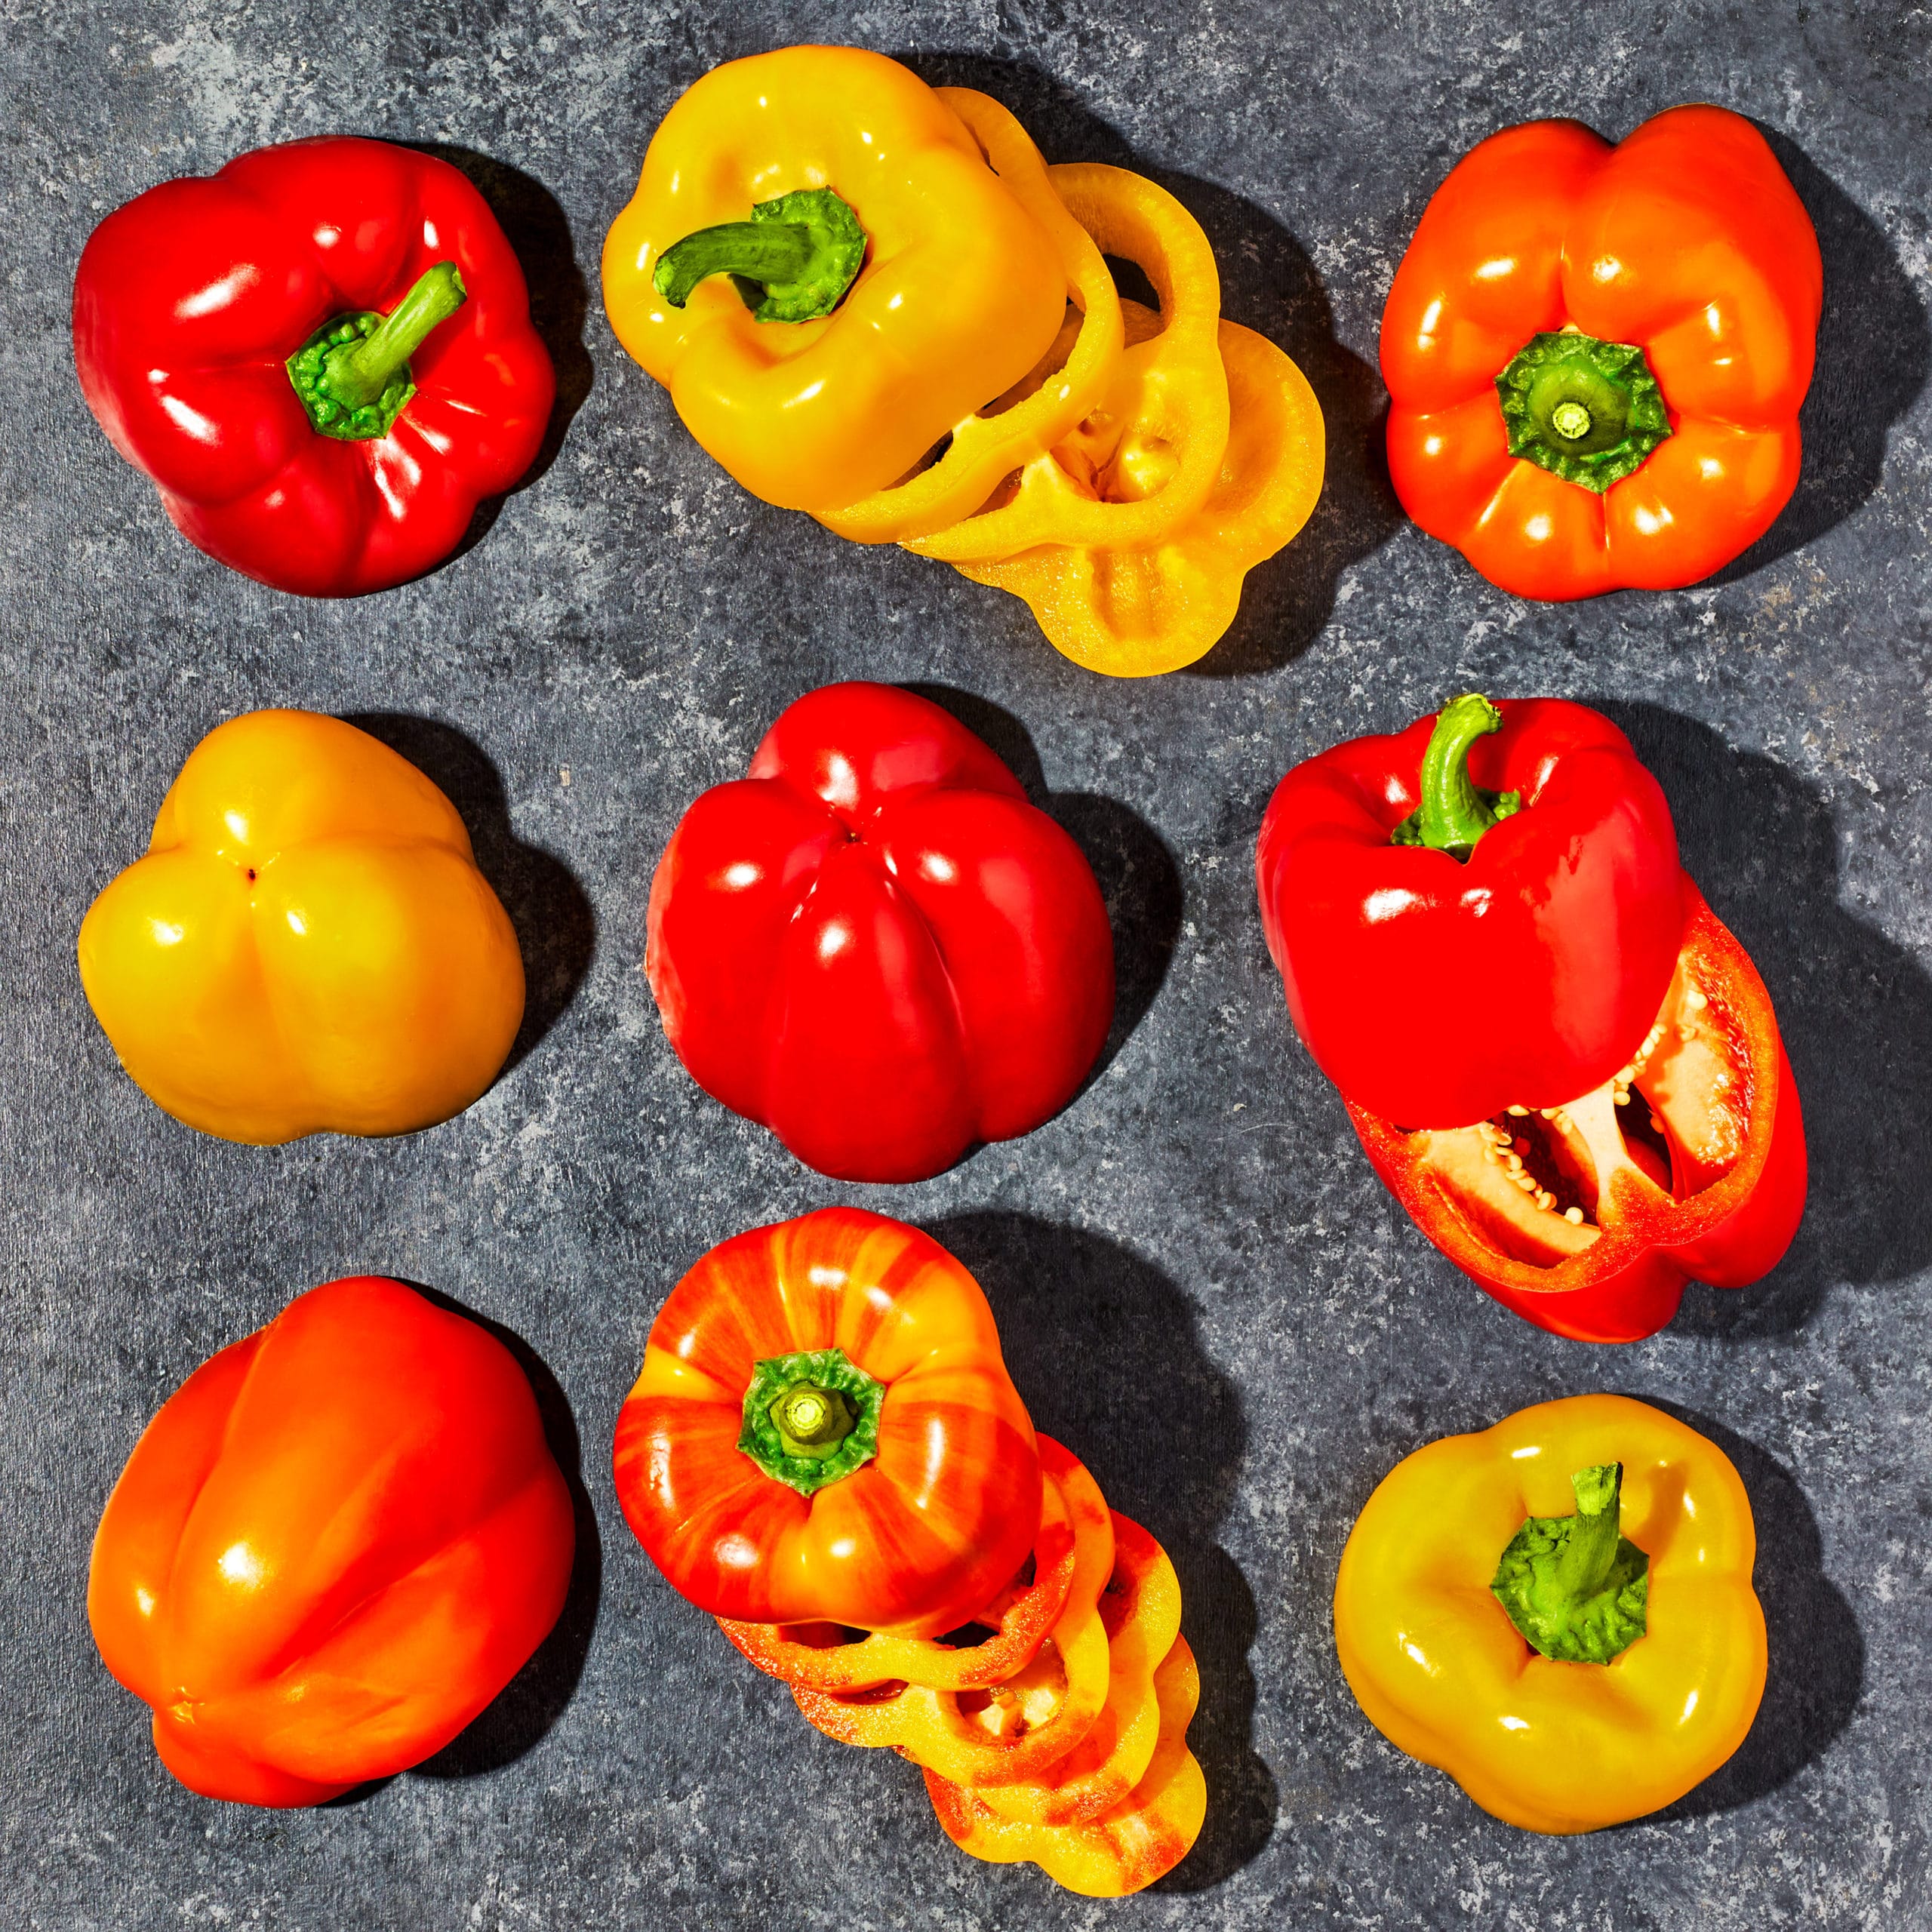 Alternating colors of red and yellow bell peppers